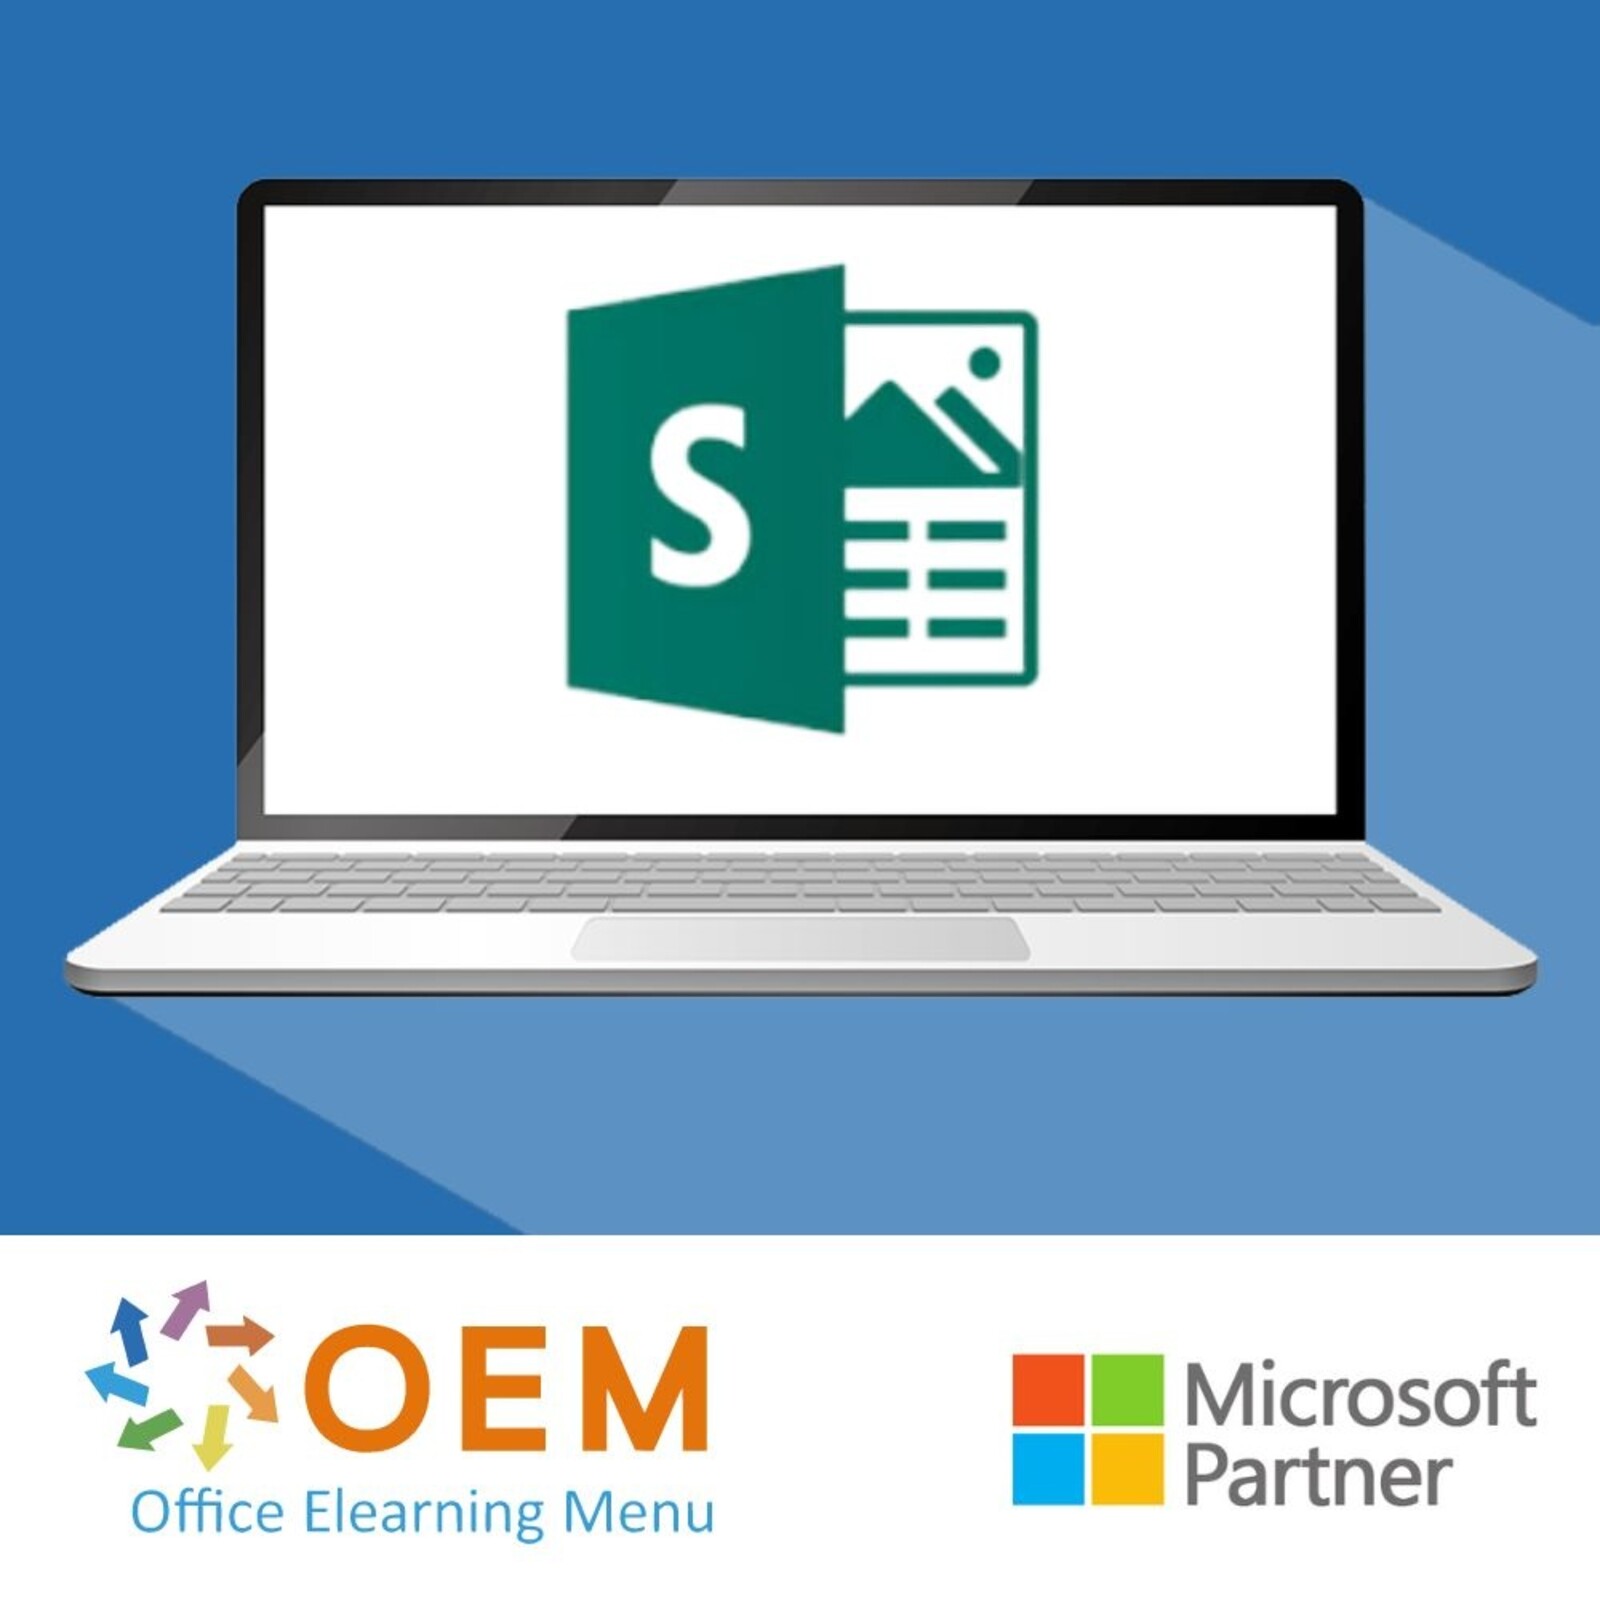 Sway Microsoft Office Sway for iOS Course E-Learning